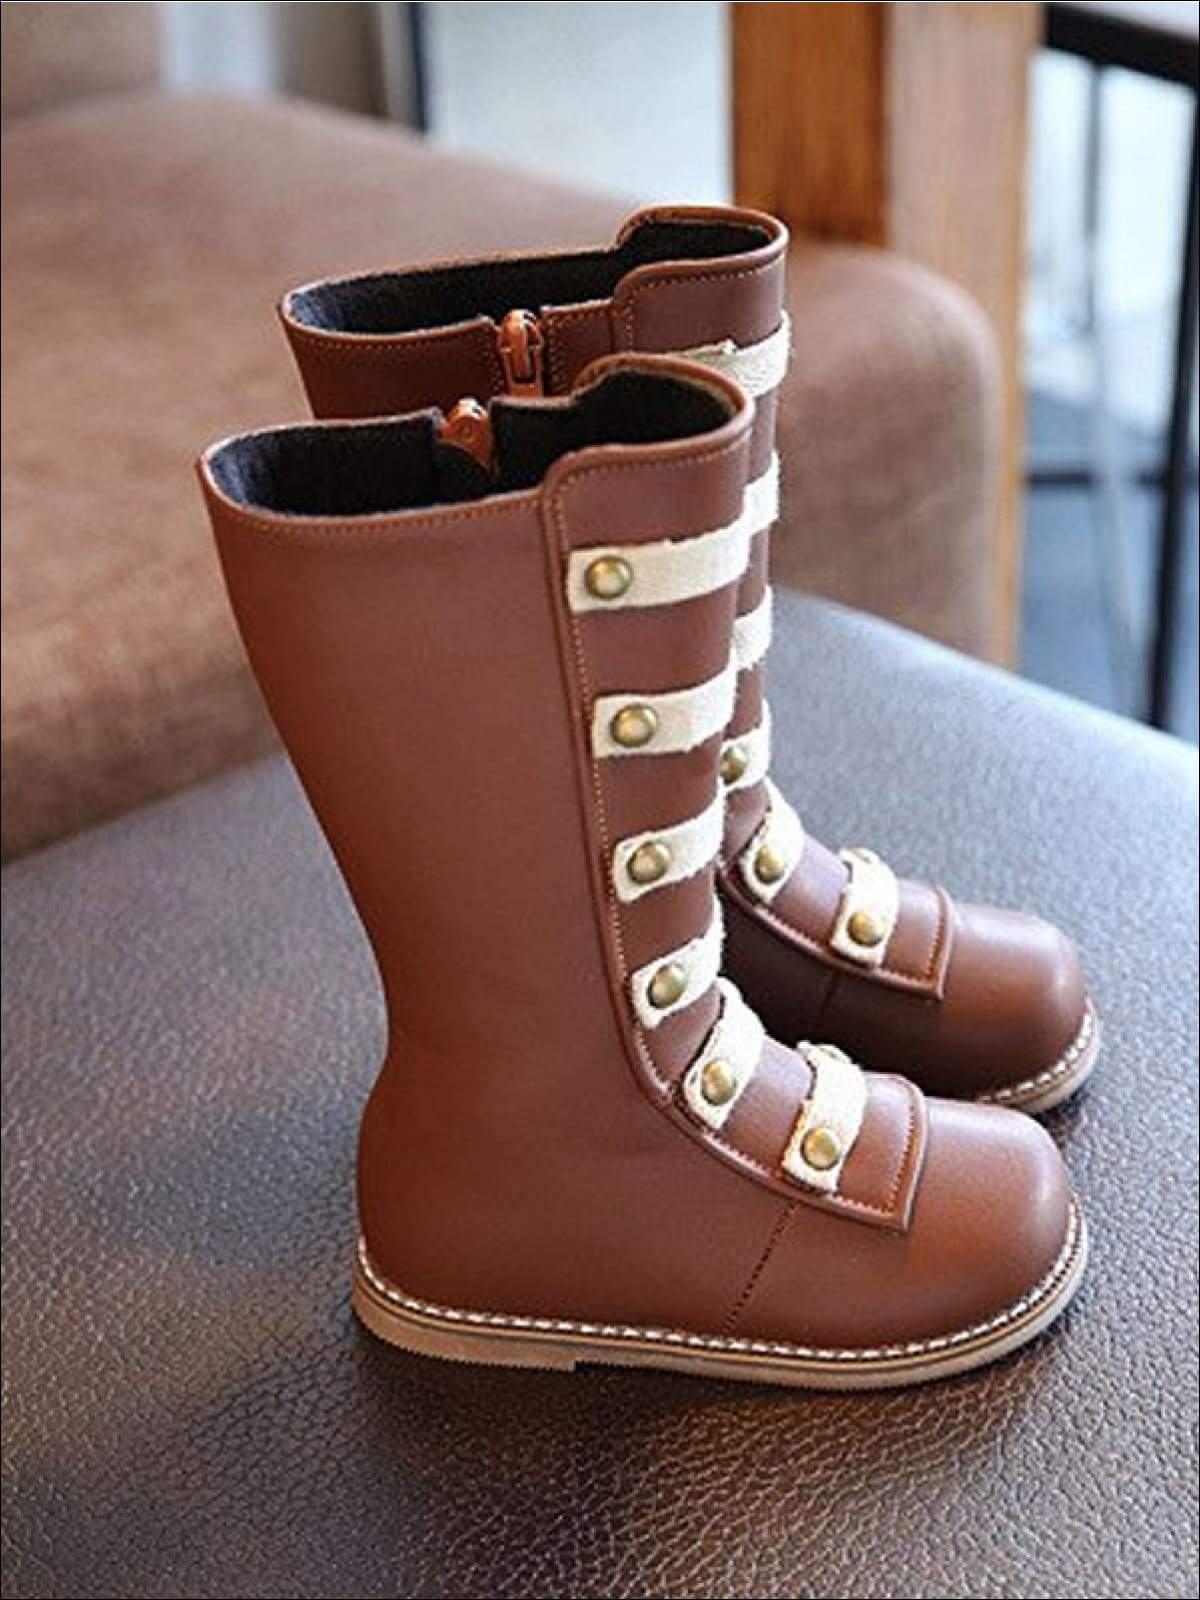 Girls Black & Brown Military Style Boots - brown / 6.5 - Girls Boots